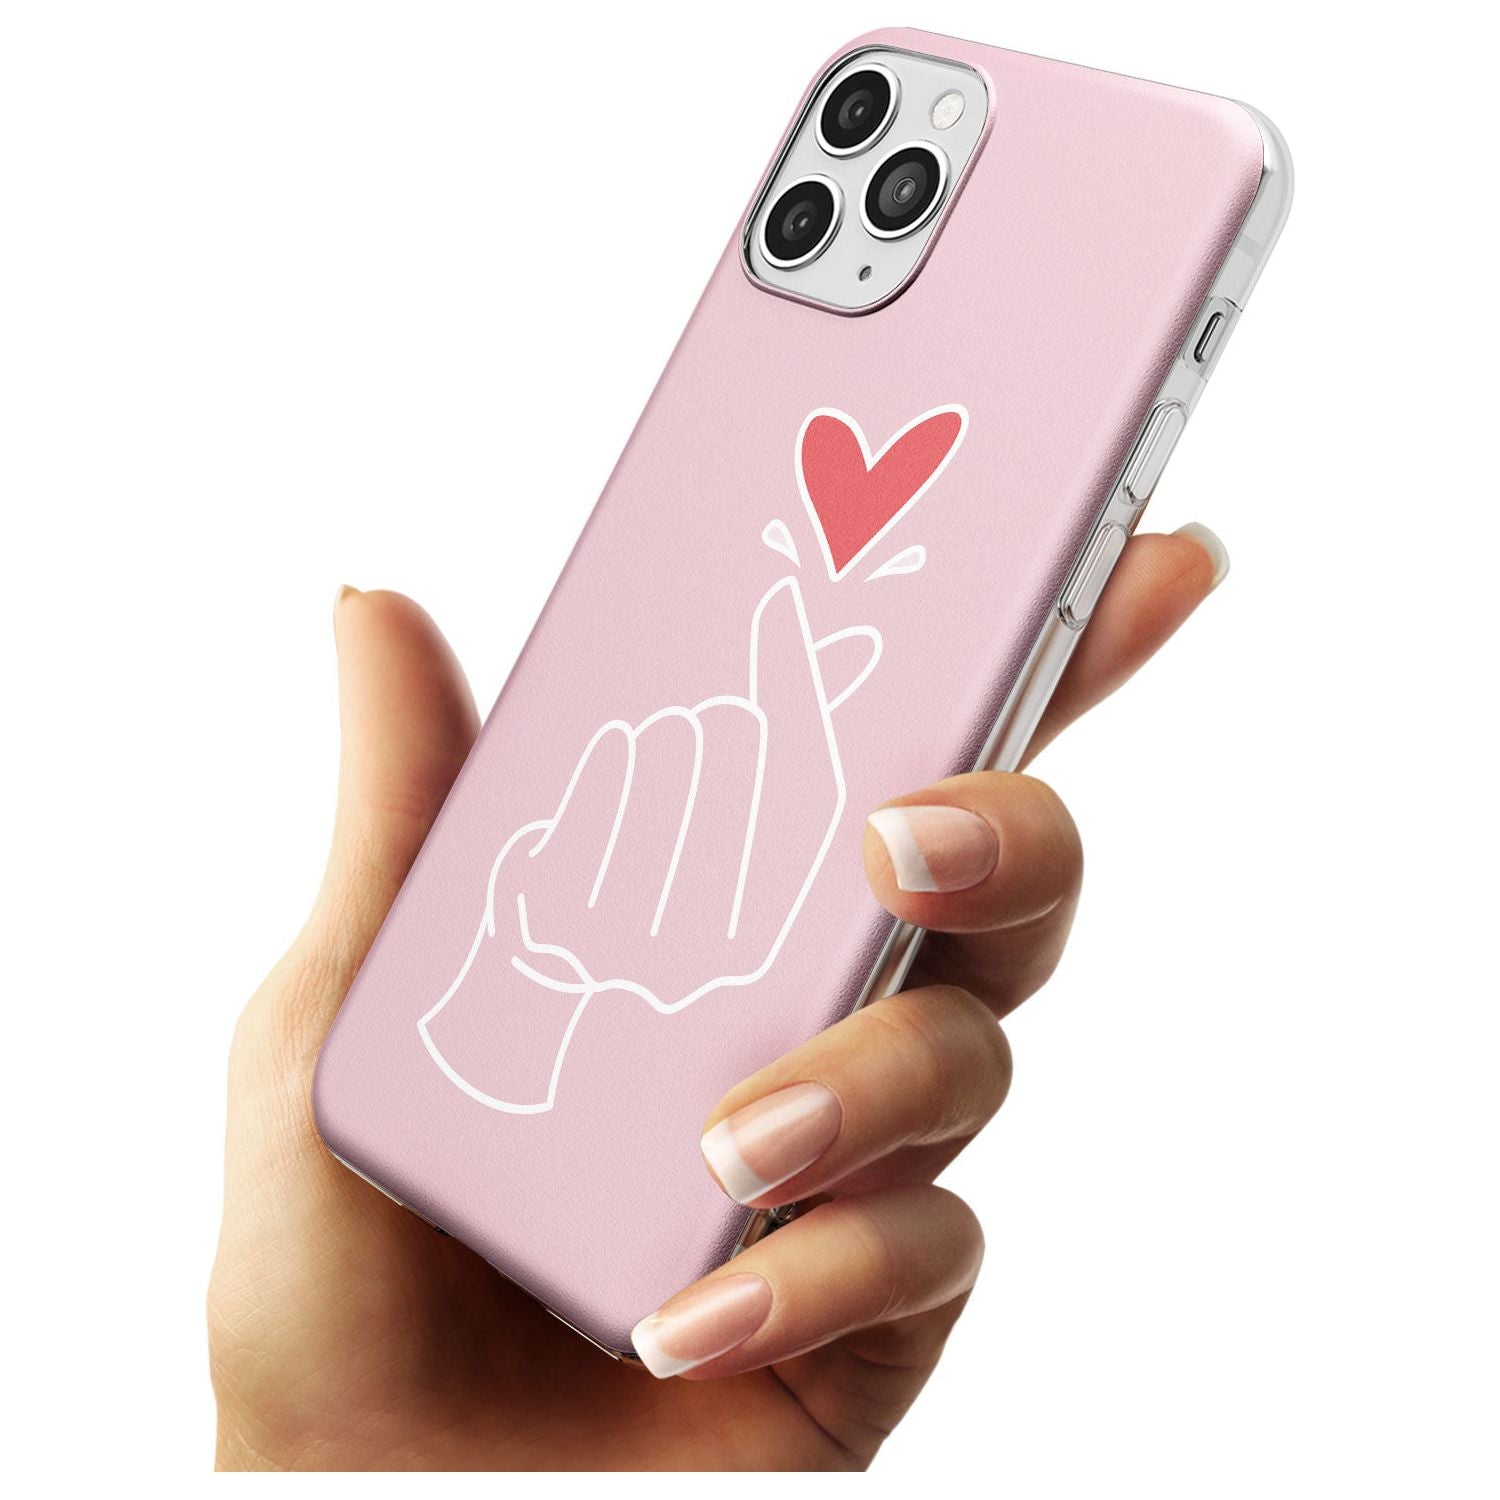 Finger Heart in Pink Black Impact Phone Case for iPhone 11 Pro Max